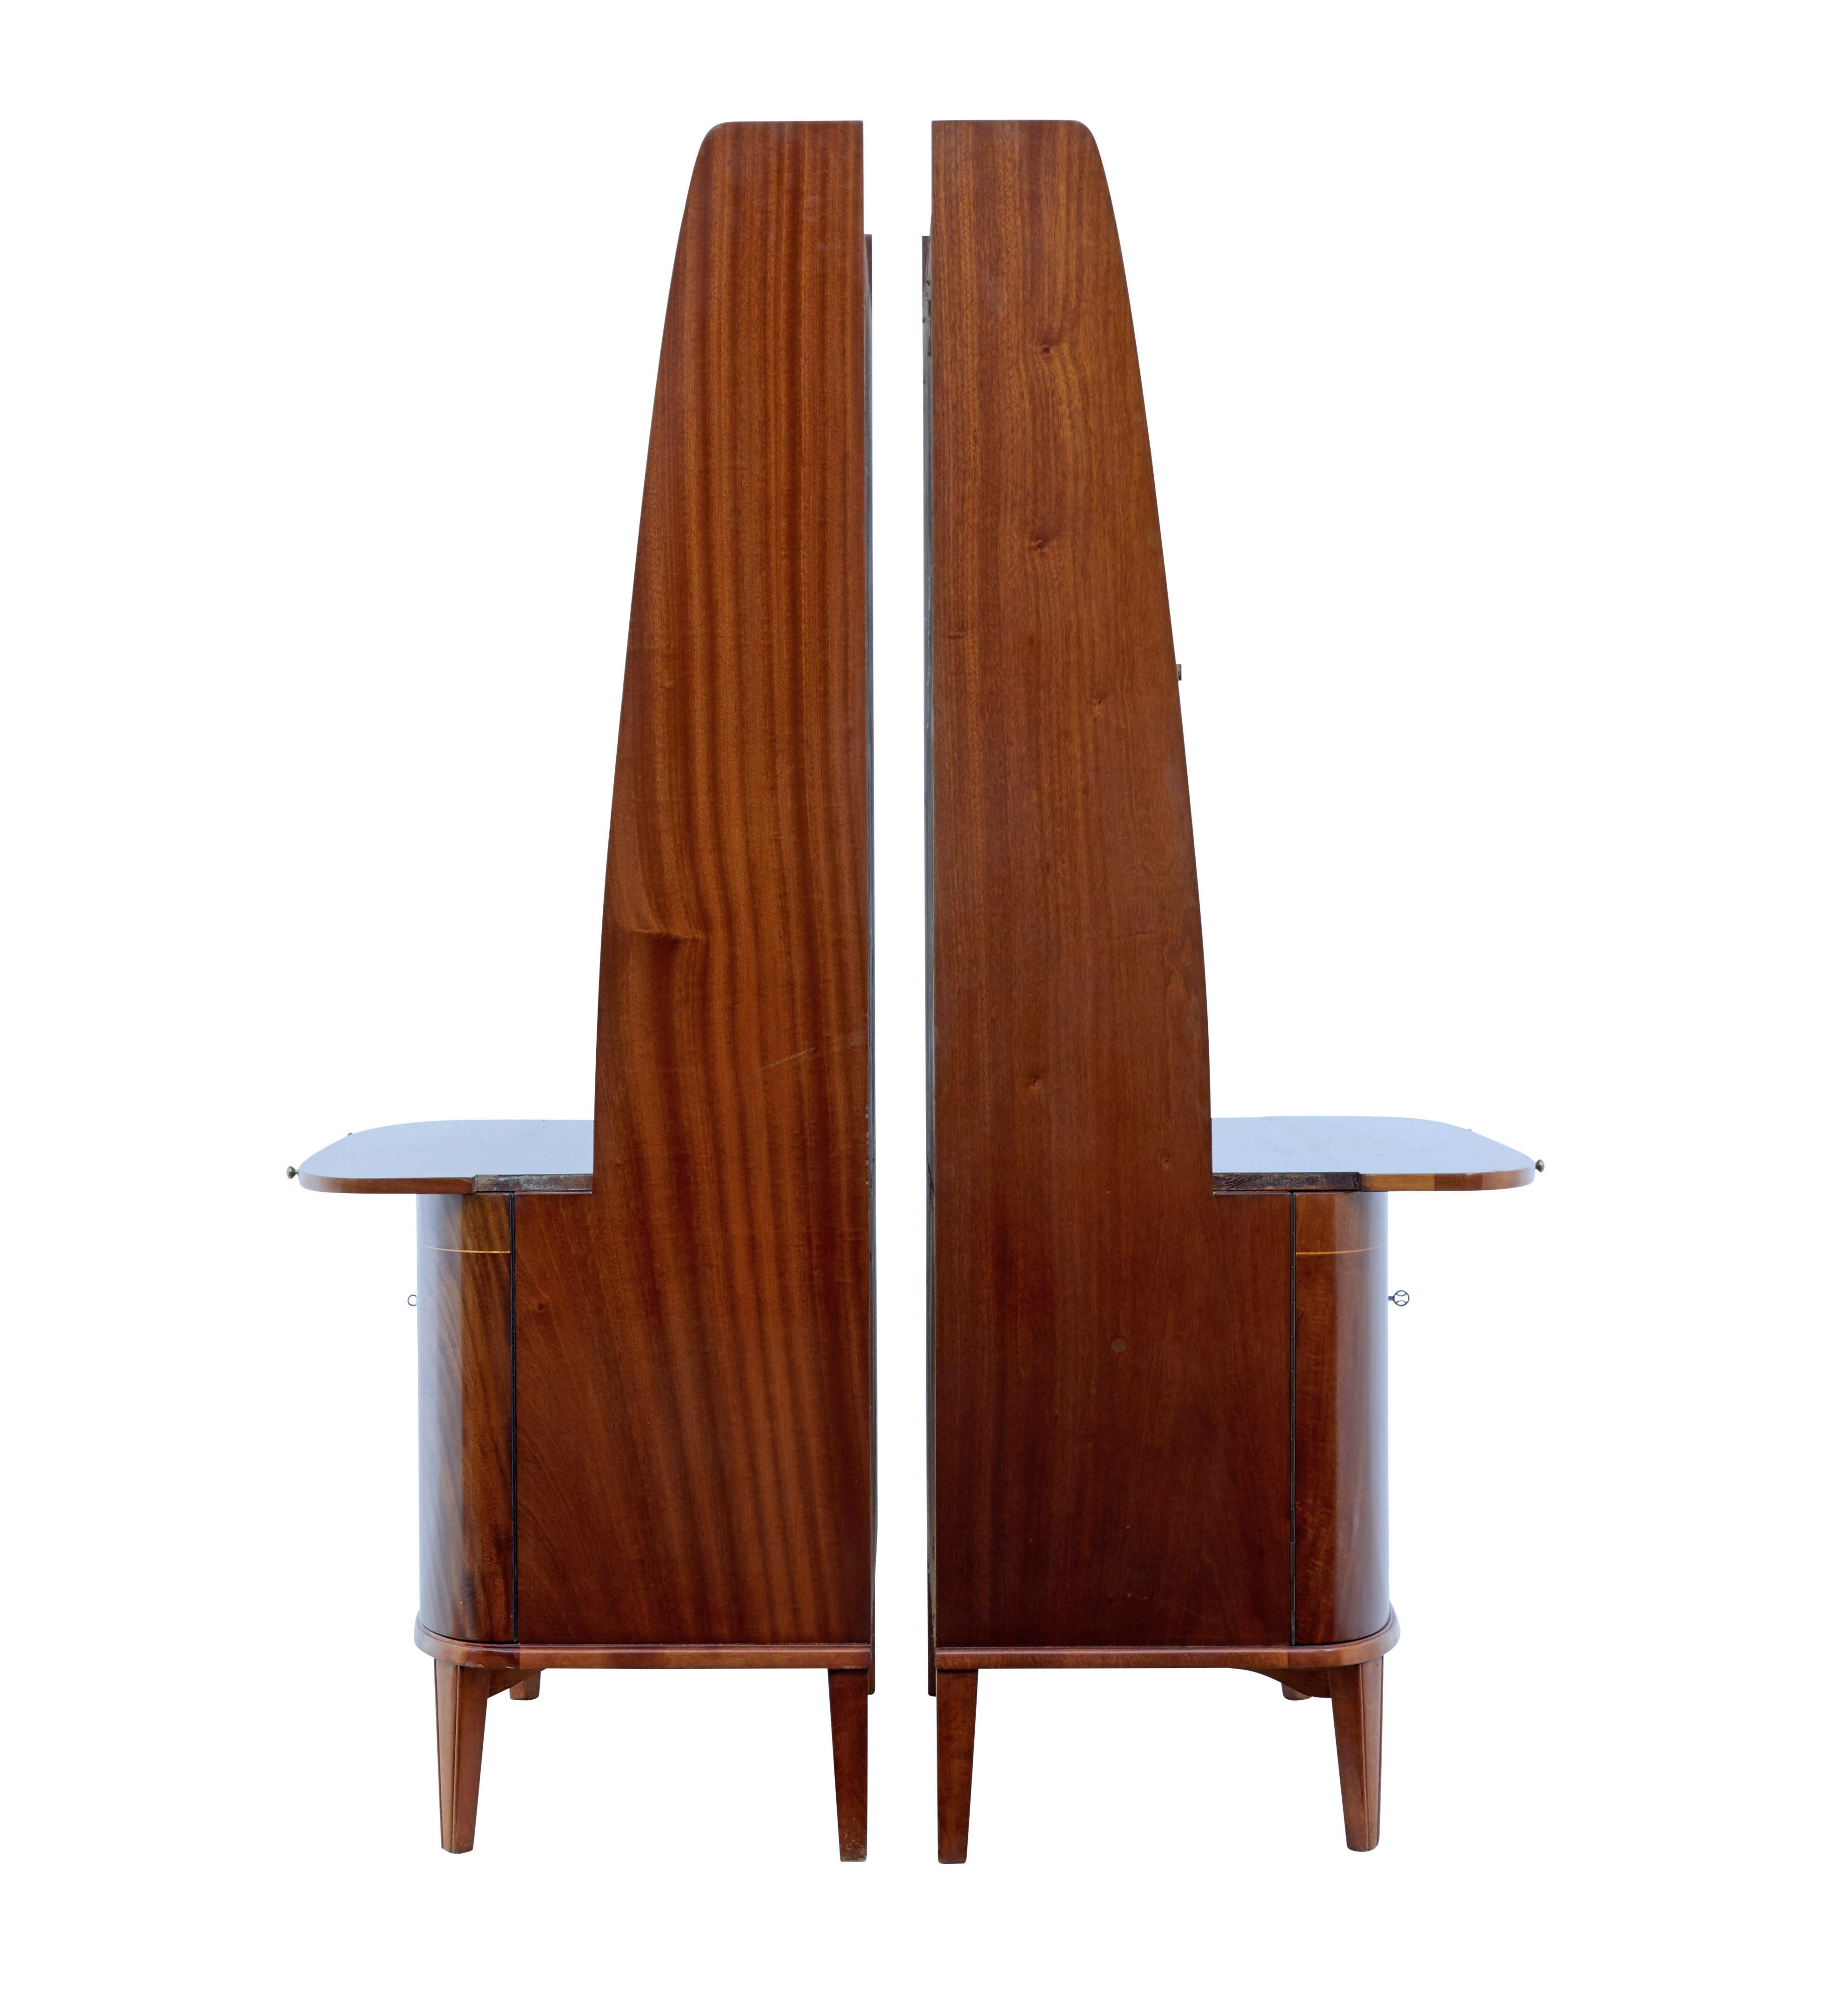 Pair of flame mahogany bookcase units circa 1950.

1 piece units, top section with 3 fixed shelves allowing 5 apertures for storage. Each surface fitted with a pullout / pull-out brushing slide. Below which a double door cupboard veneered with